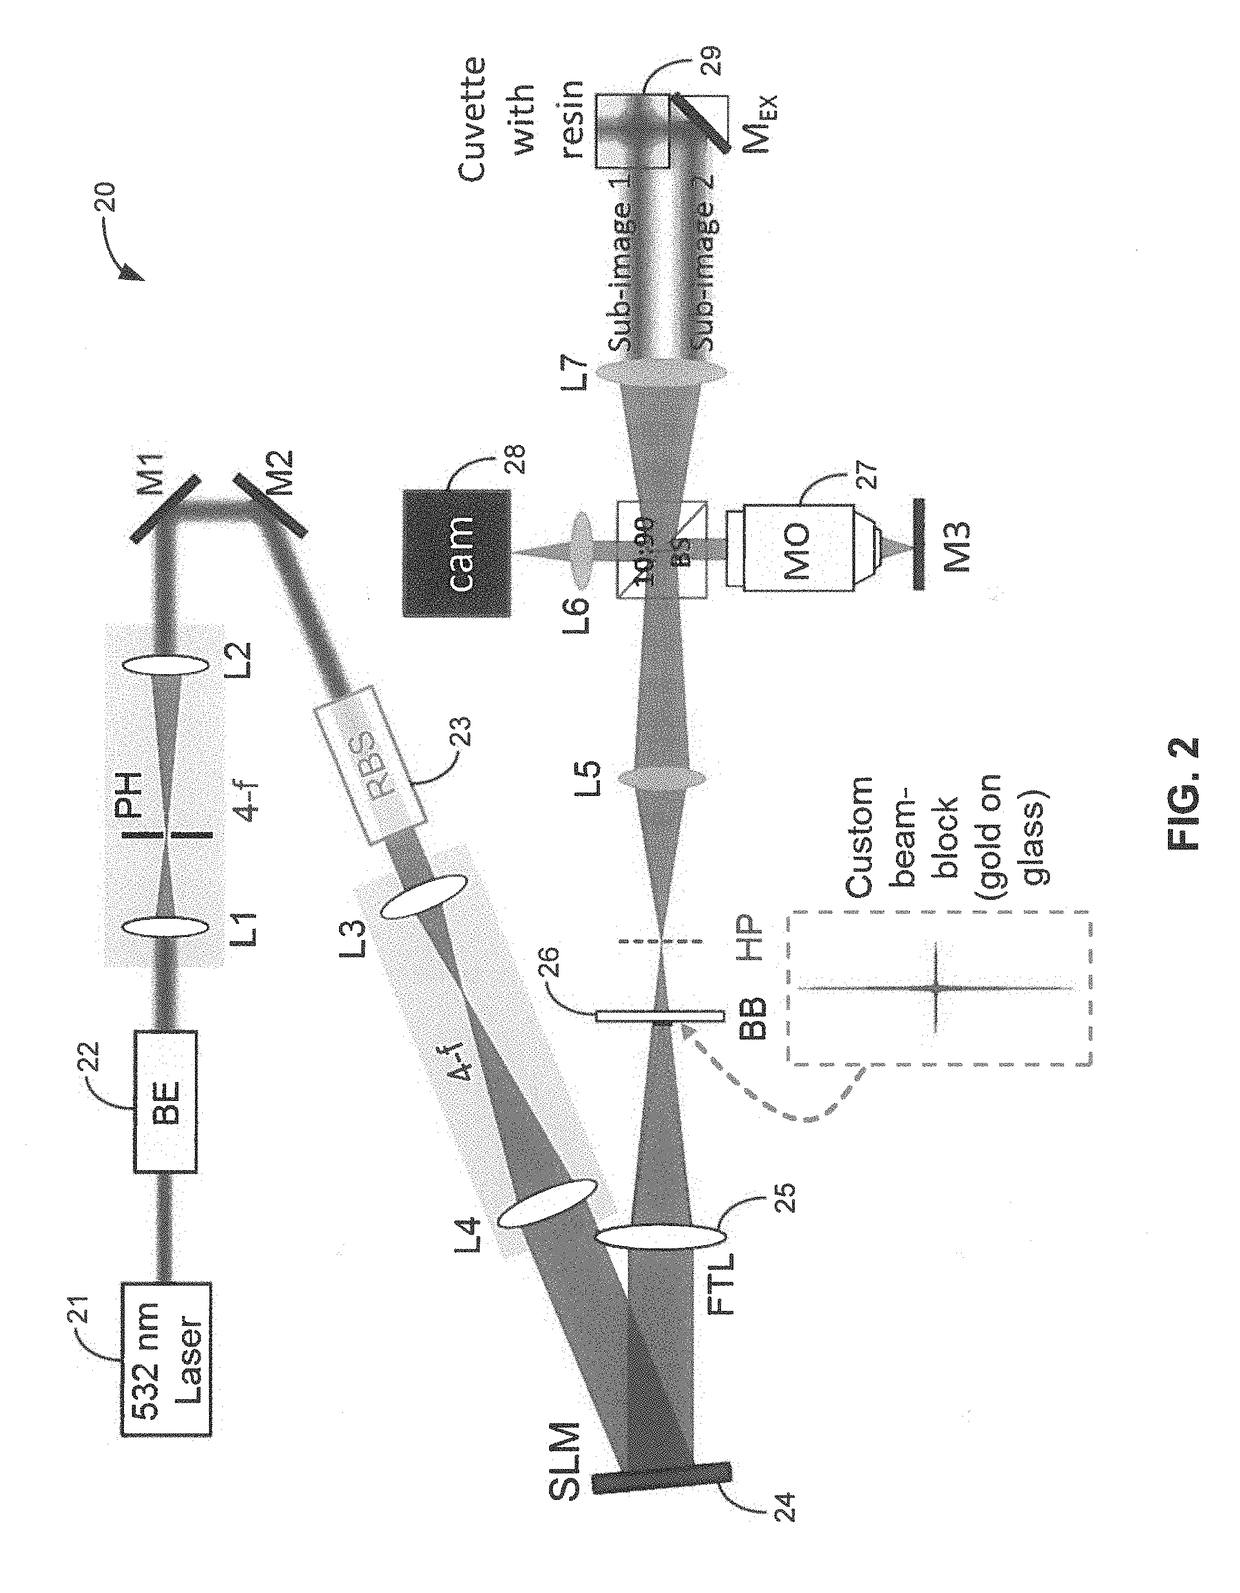 Multi-beam resin curing system and method for whole-volume additive manufacturing